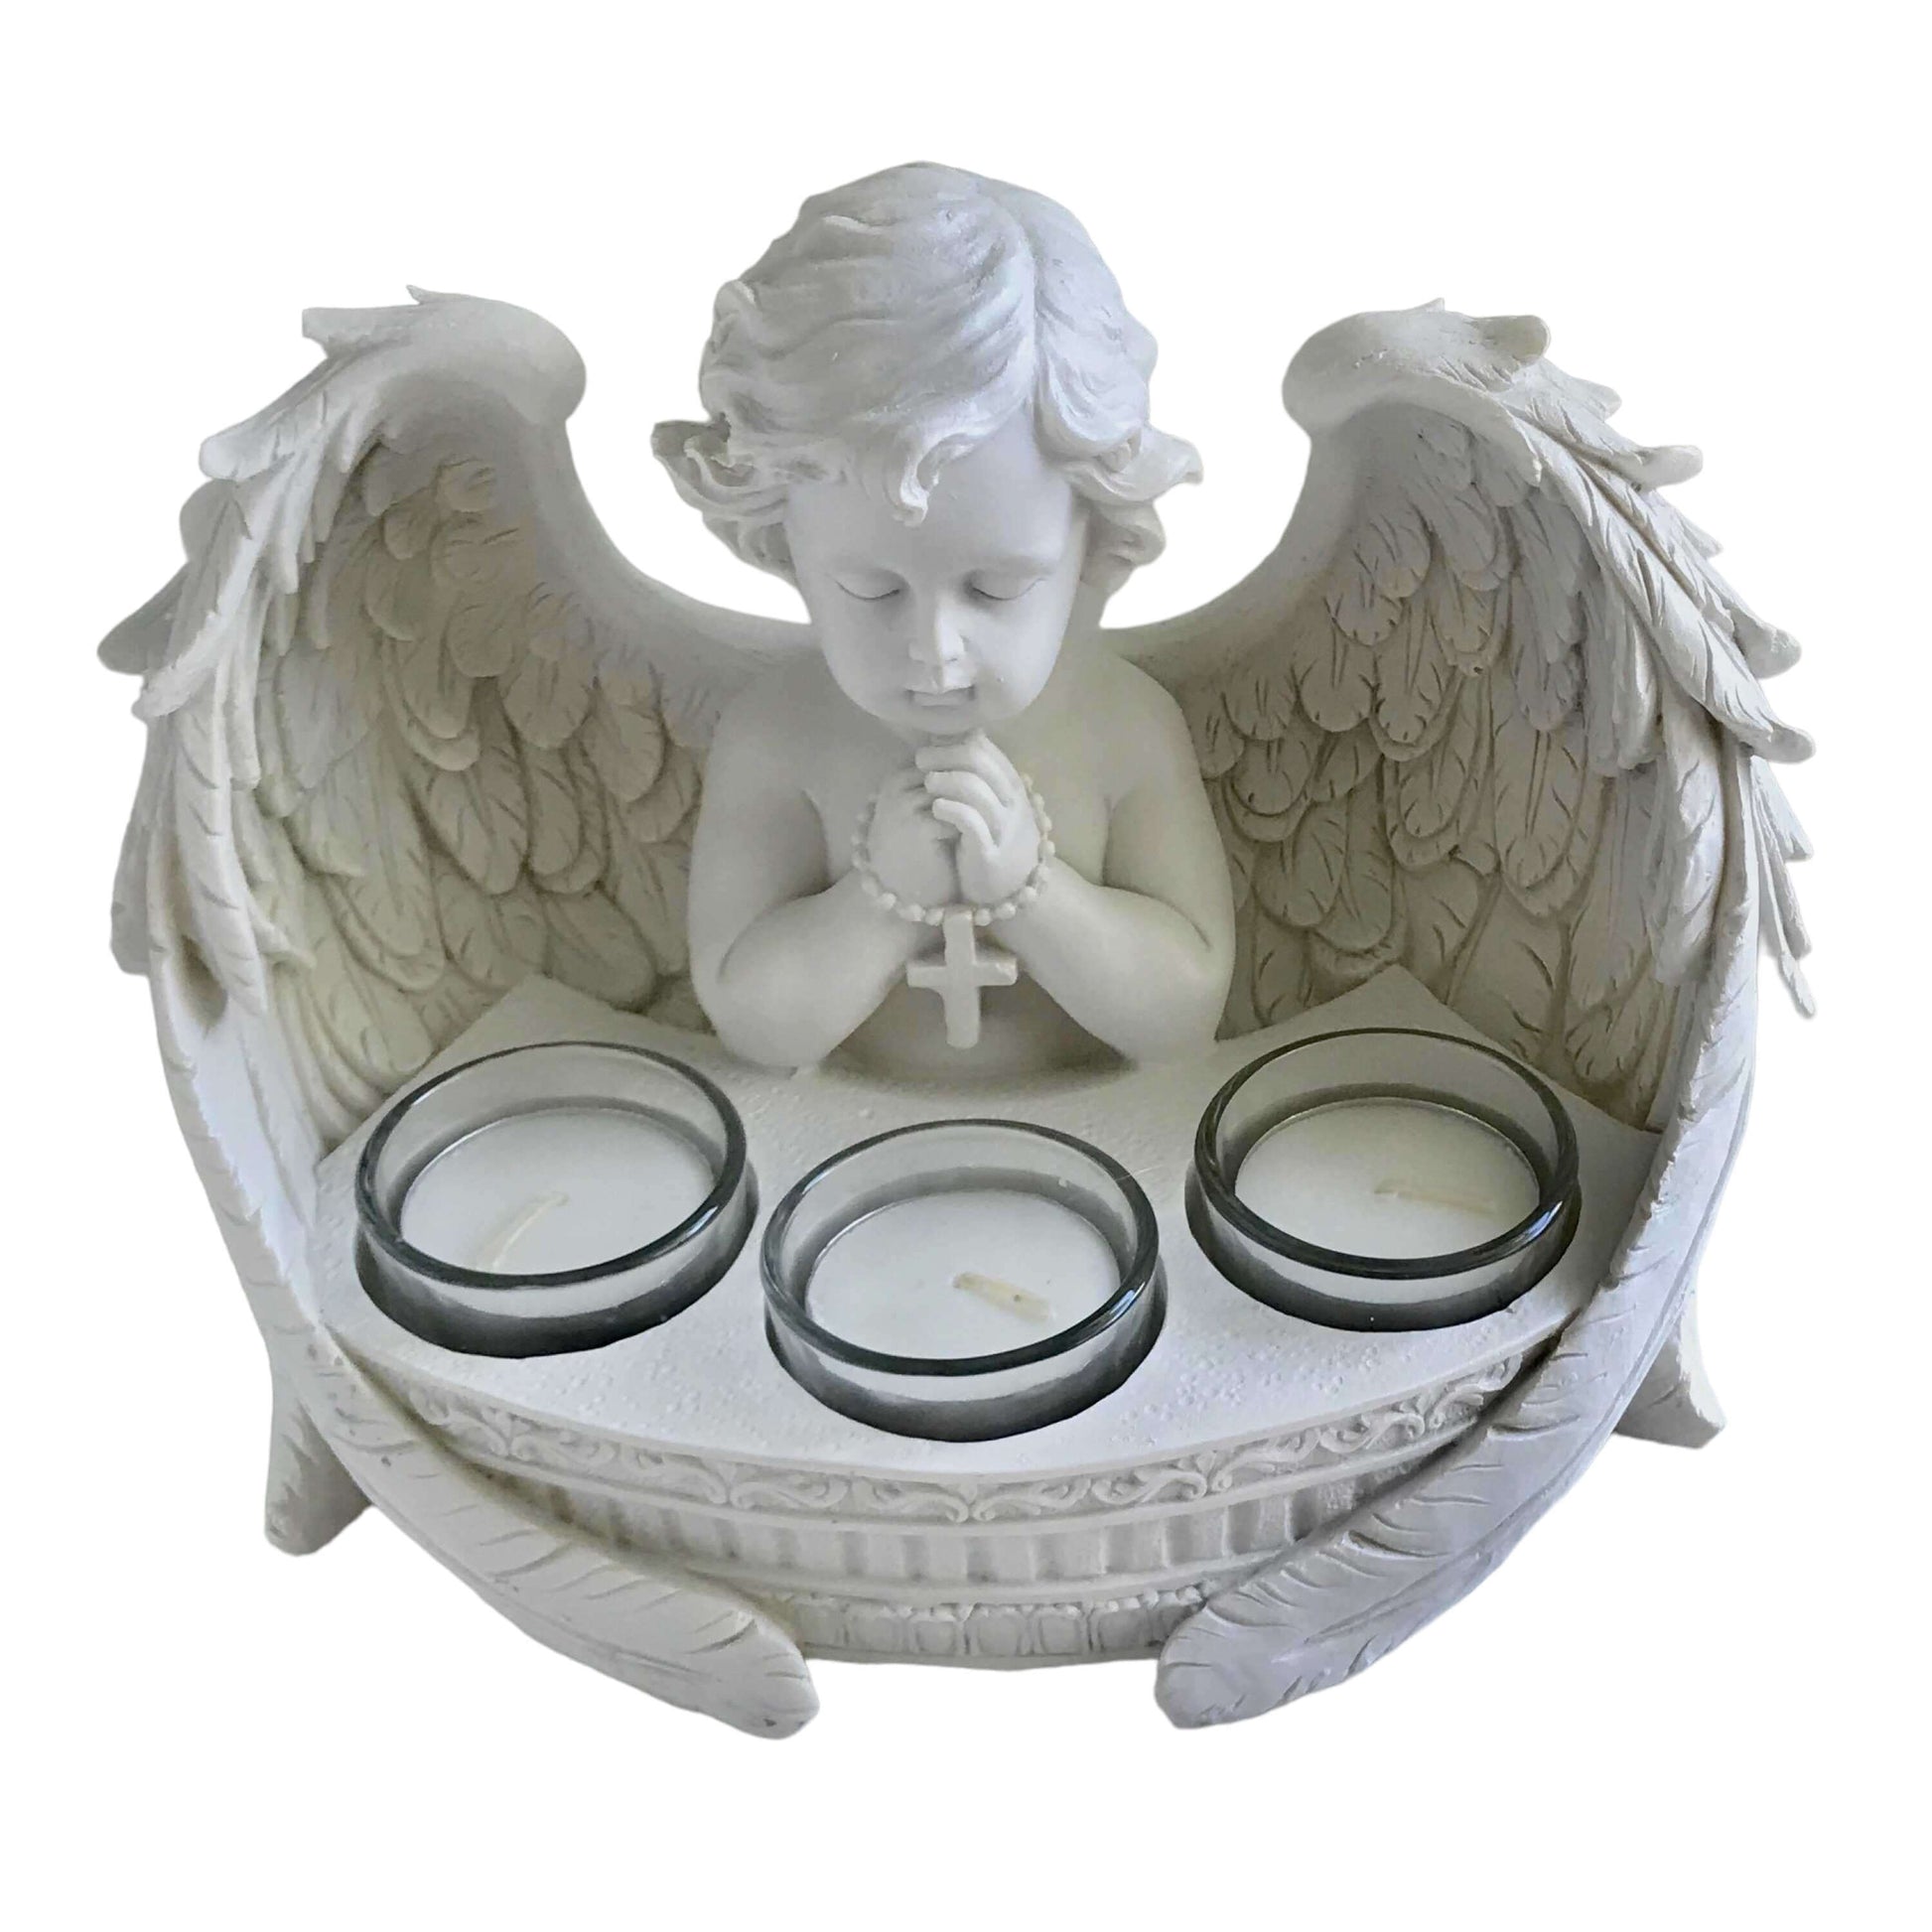 Angel Cherub Candle with Tealights - The Renmy Store Homewares & Gifts 